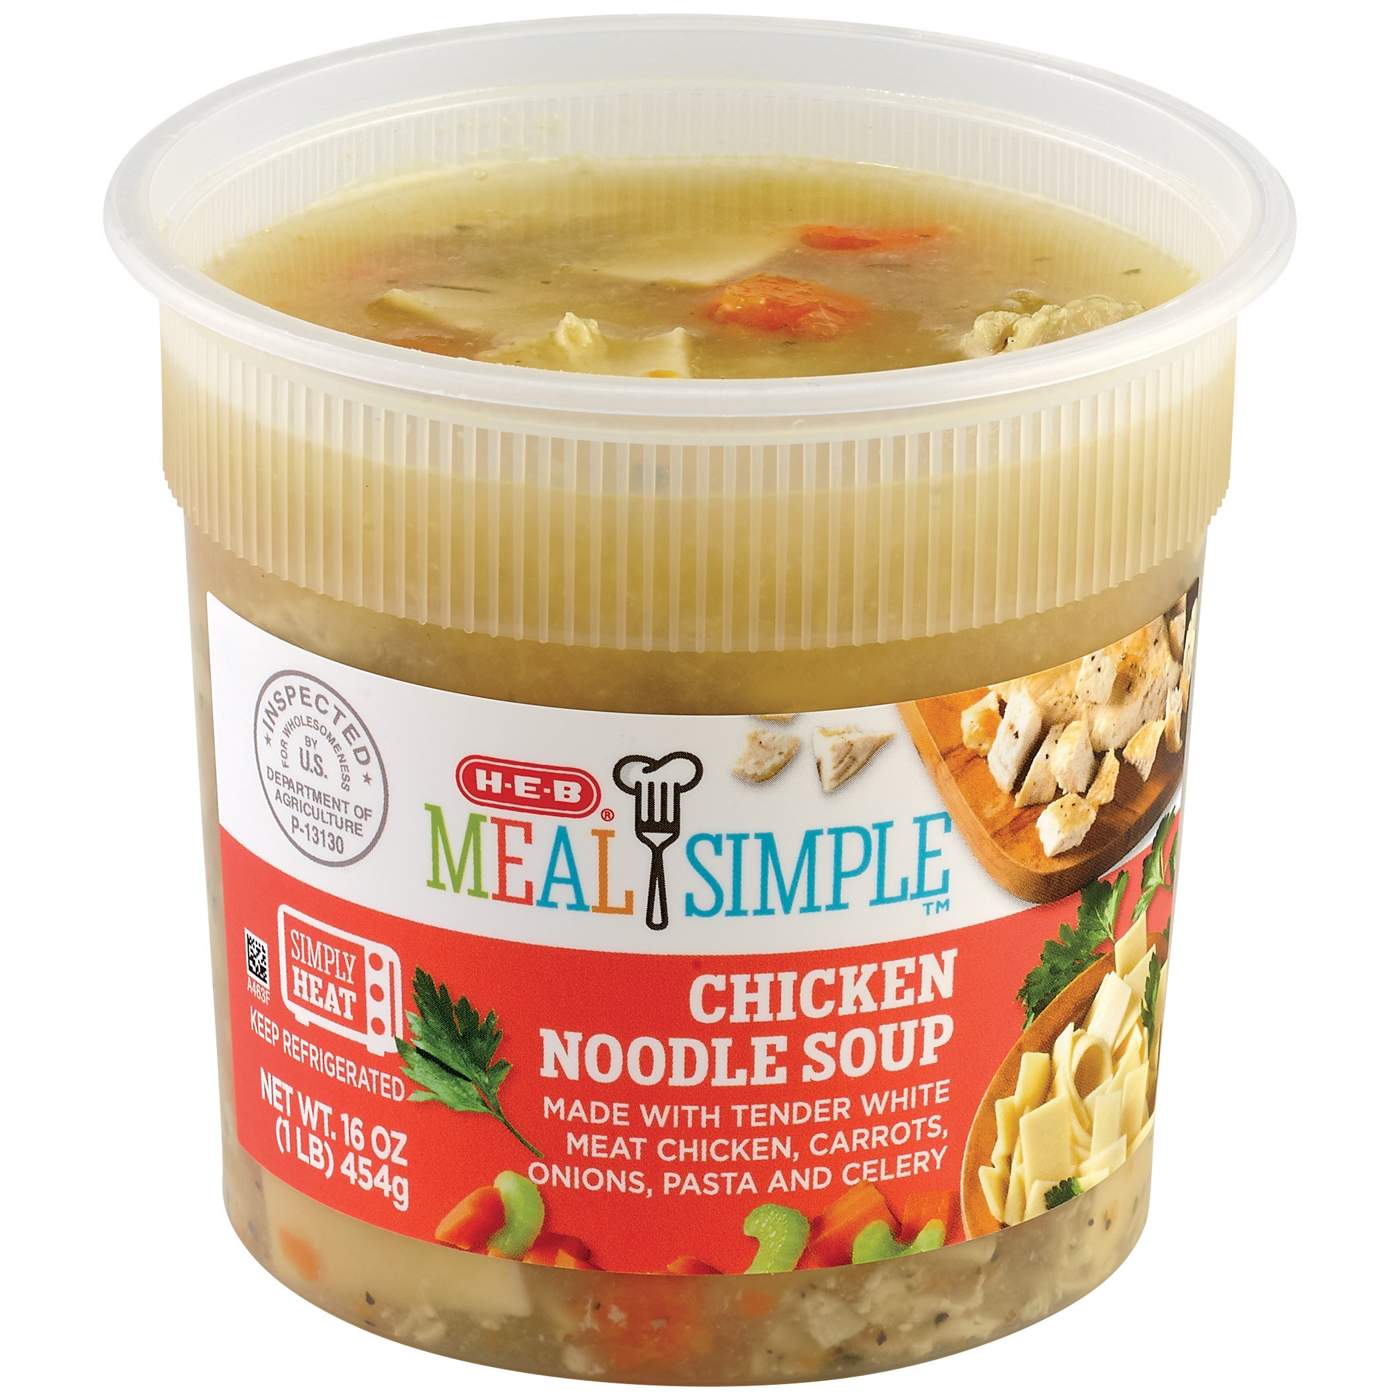 Meal Simple by H-E-B Chicken Noodle Soup; image 1 of 3